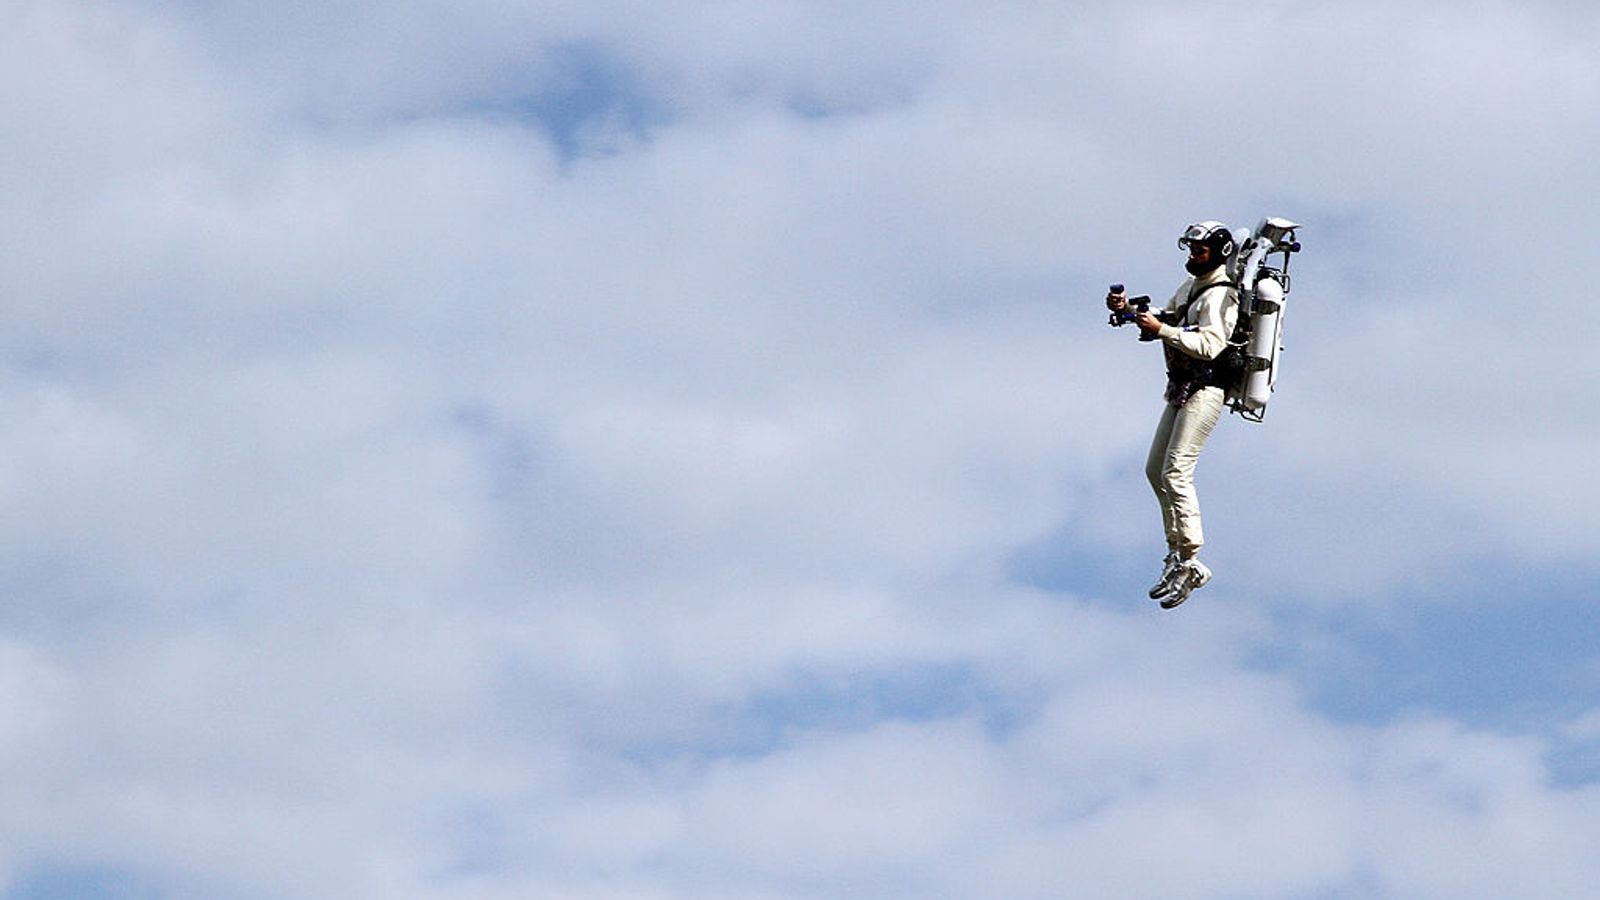 Video Airplane pilots spot a person wearing a jetpack and flying at 3,000  feet - ABC News